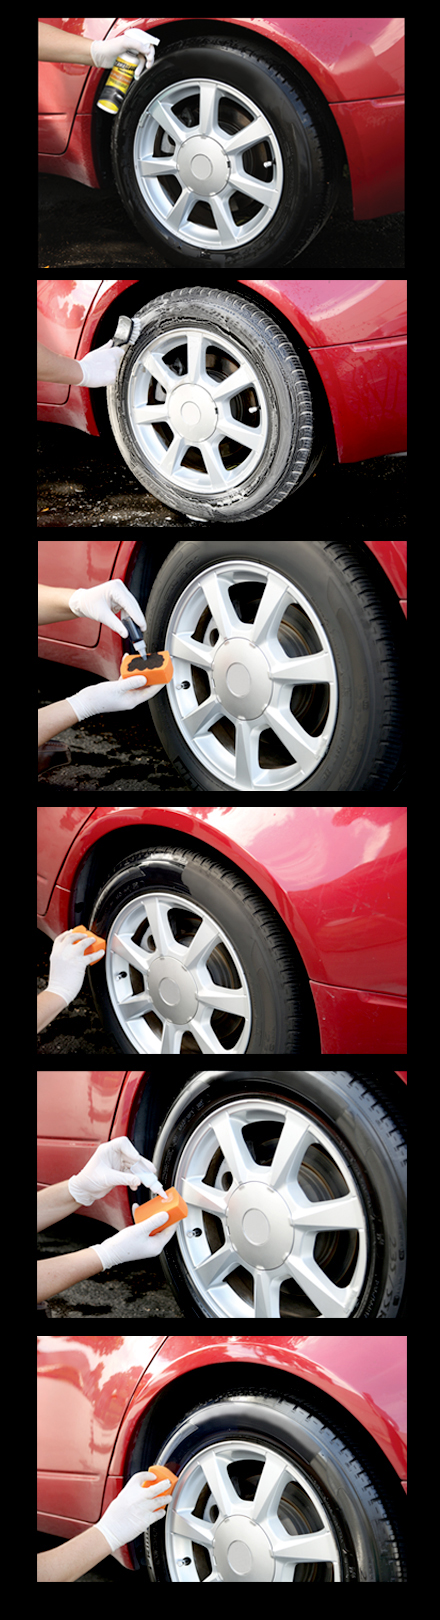 Permagloss Permanent Tire Protectant Tire Shine